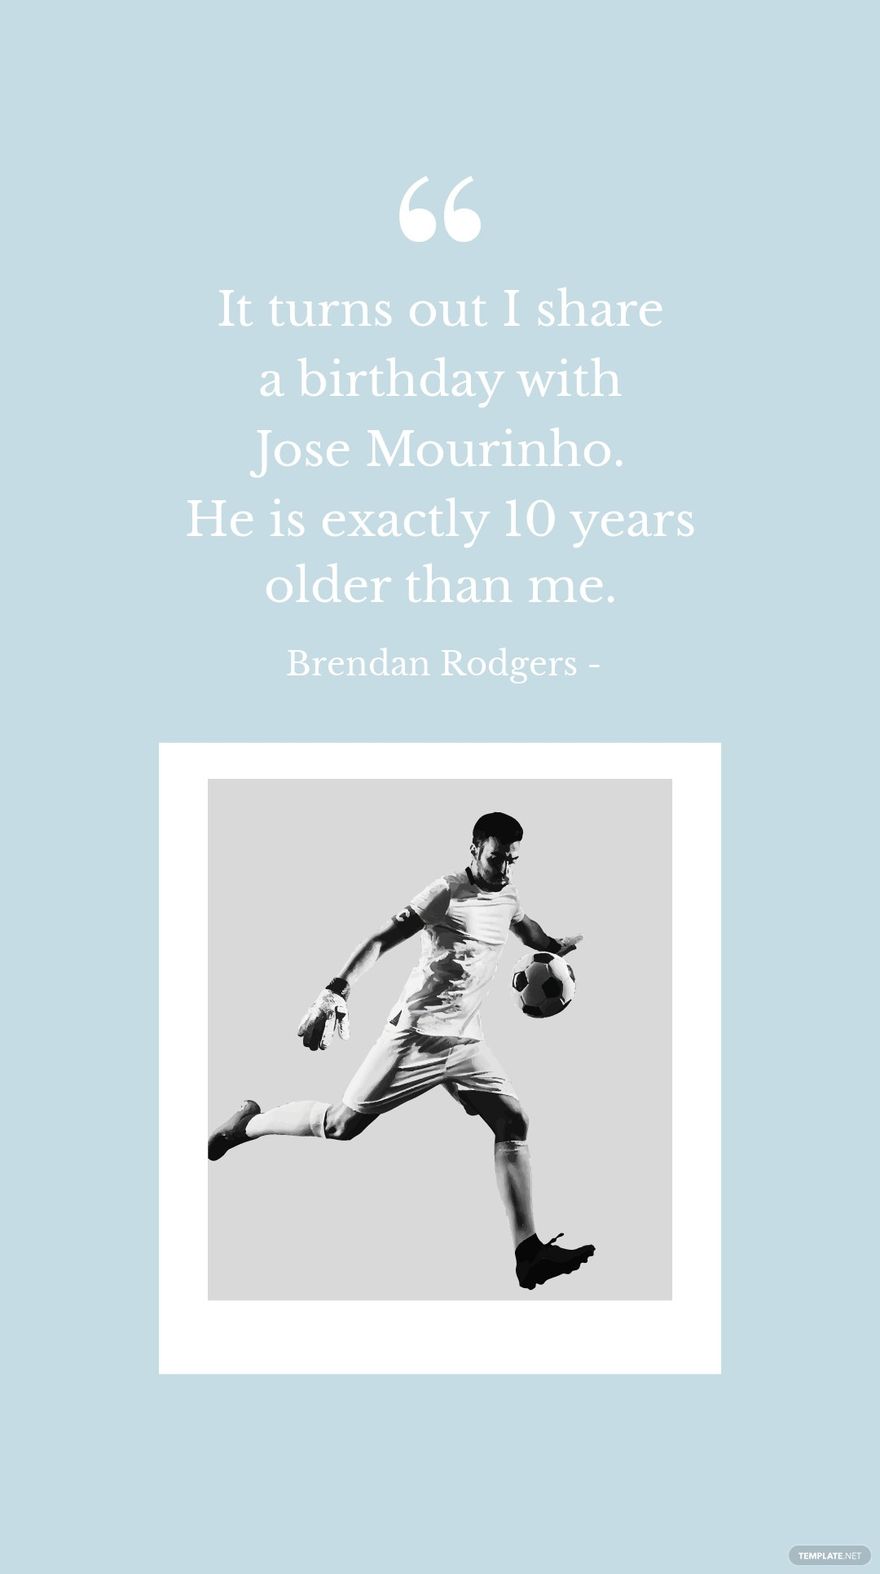 Brendan Rodgers - It turns out I share a birthday with Jose Mourinho. He is exactly 10 years older than me.